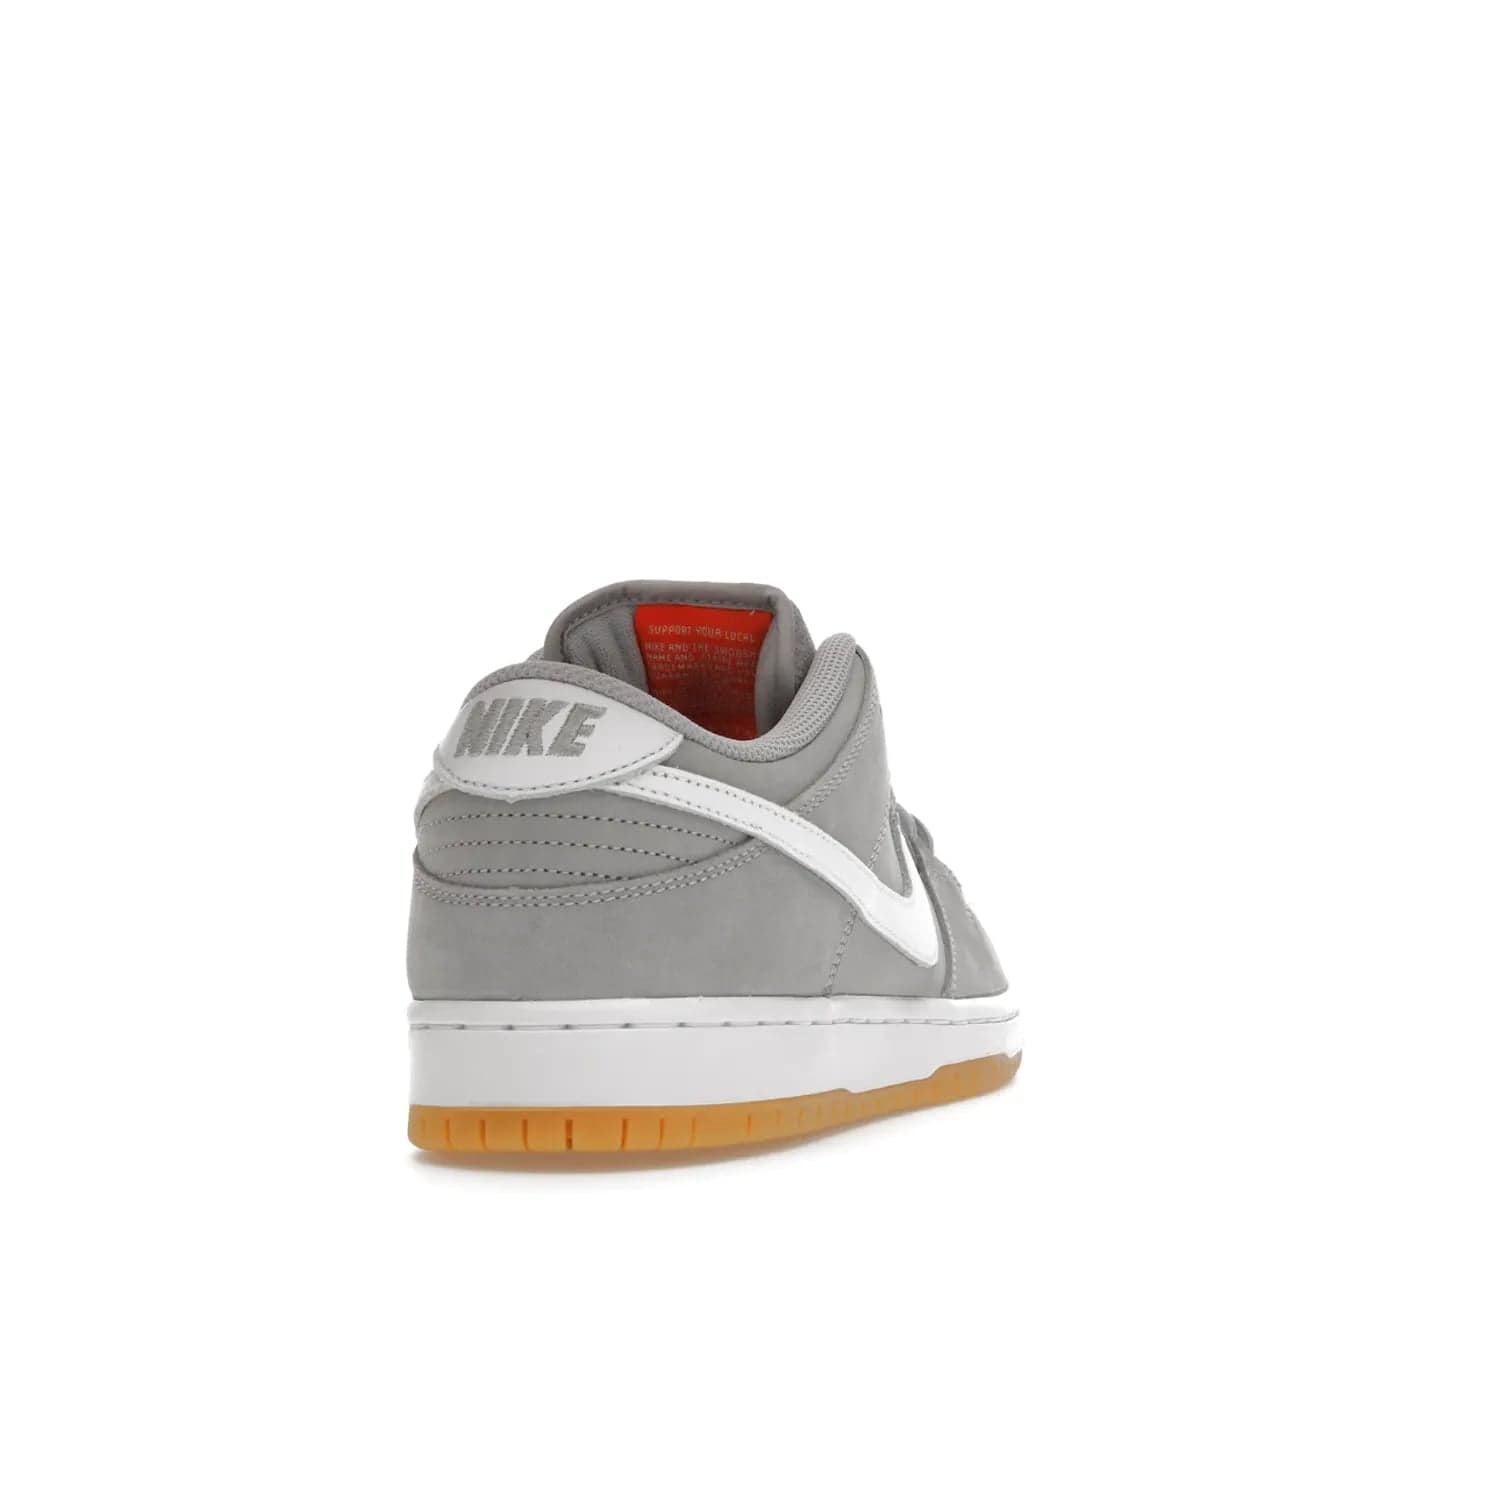 Nike SB Dunk Low Pro ISO Orange Label Wolf Grey Gum - Image 30 - Only at www.BallersClubKickz.com - Introducing Nike's SB Dunk Low Pro ISO Orange Label Wolf Grey Gum - a stylish shoe with a premium Wolf Grey upper, white leather Nike Swoosh, and an eye-catching gum outsole. With special Nike branding and packaging, this shoe adds a unique fashion statement. Out Feb. 24, 2023.